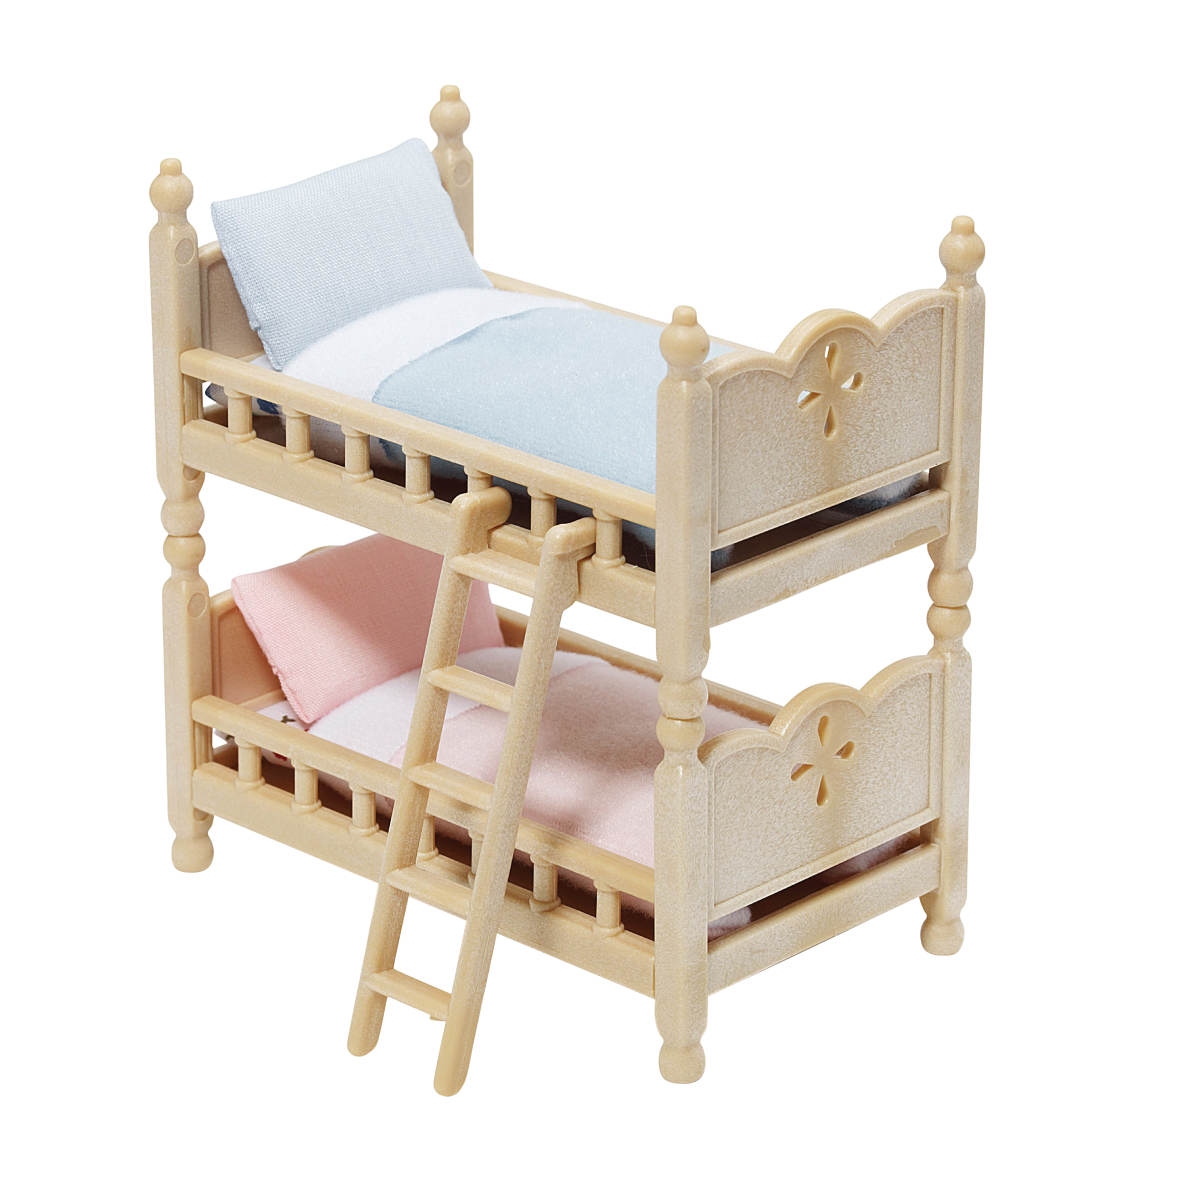 Stack & Play Beds, , large image 0